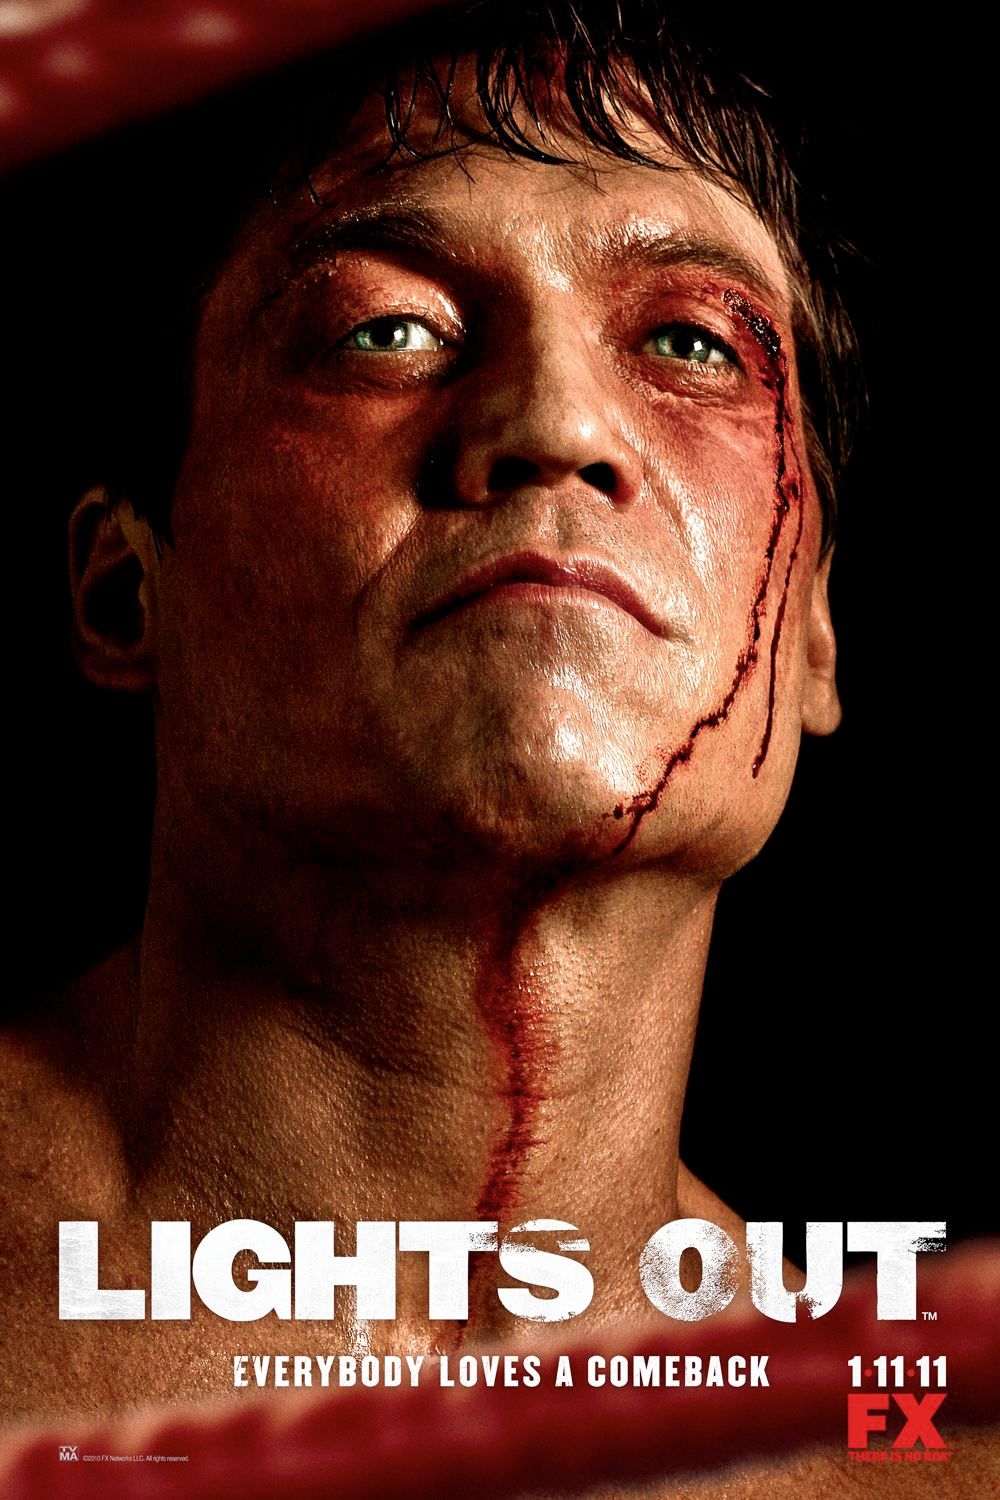 Holt McCallany and Warren Leight discuss the FX boxing series Lights OutThe FX boxing drama {0} is bringing its first season to a close over the next few weeks, leading up to Patrick Lights Leary's ultimate showdown with Death Row Reynolds ({1}) for the heavyweight title. The next episode of {2}, entitled {3}, airs on Tuesday, March 22 at 10 PM ET on FX, which is the 11th episode of this 13-episode first season. Series star {4} and executive producer {5} recently held a conference call to discus